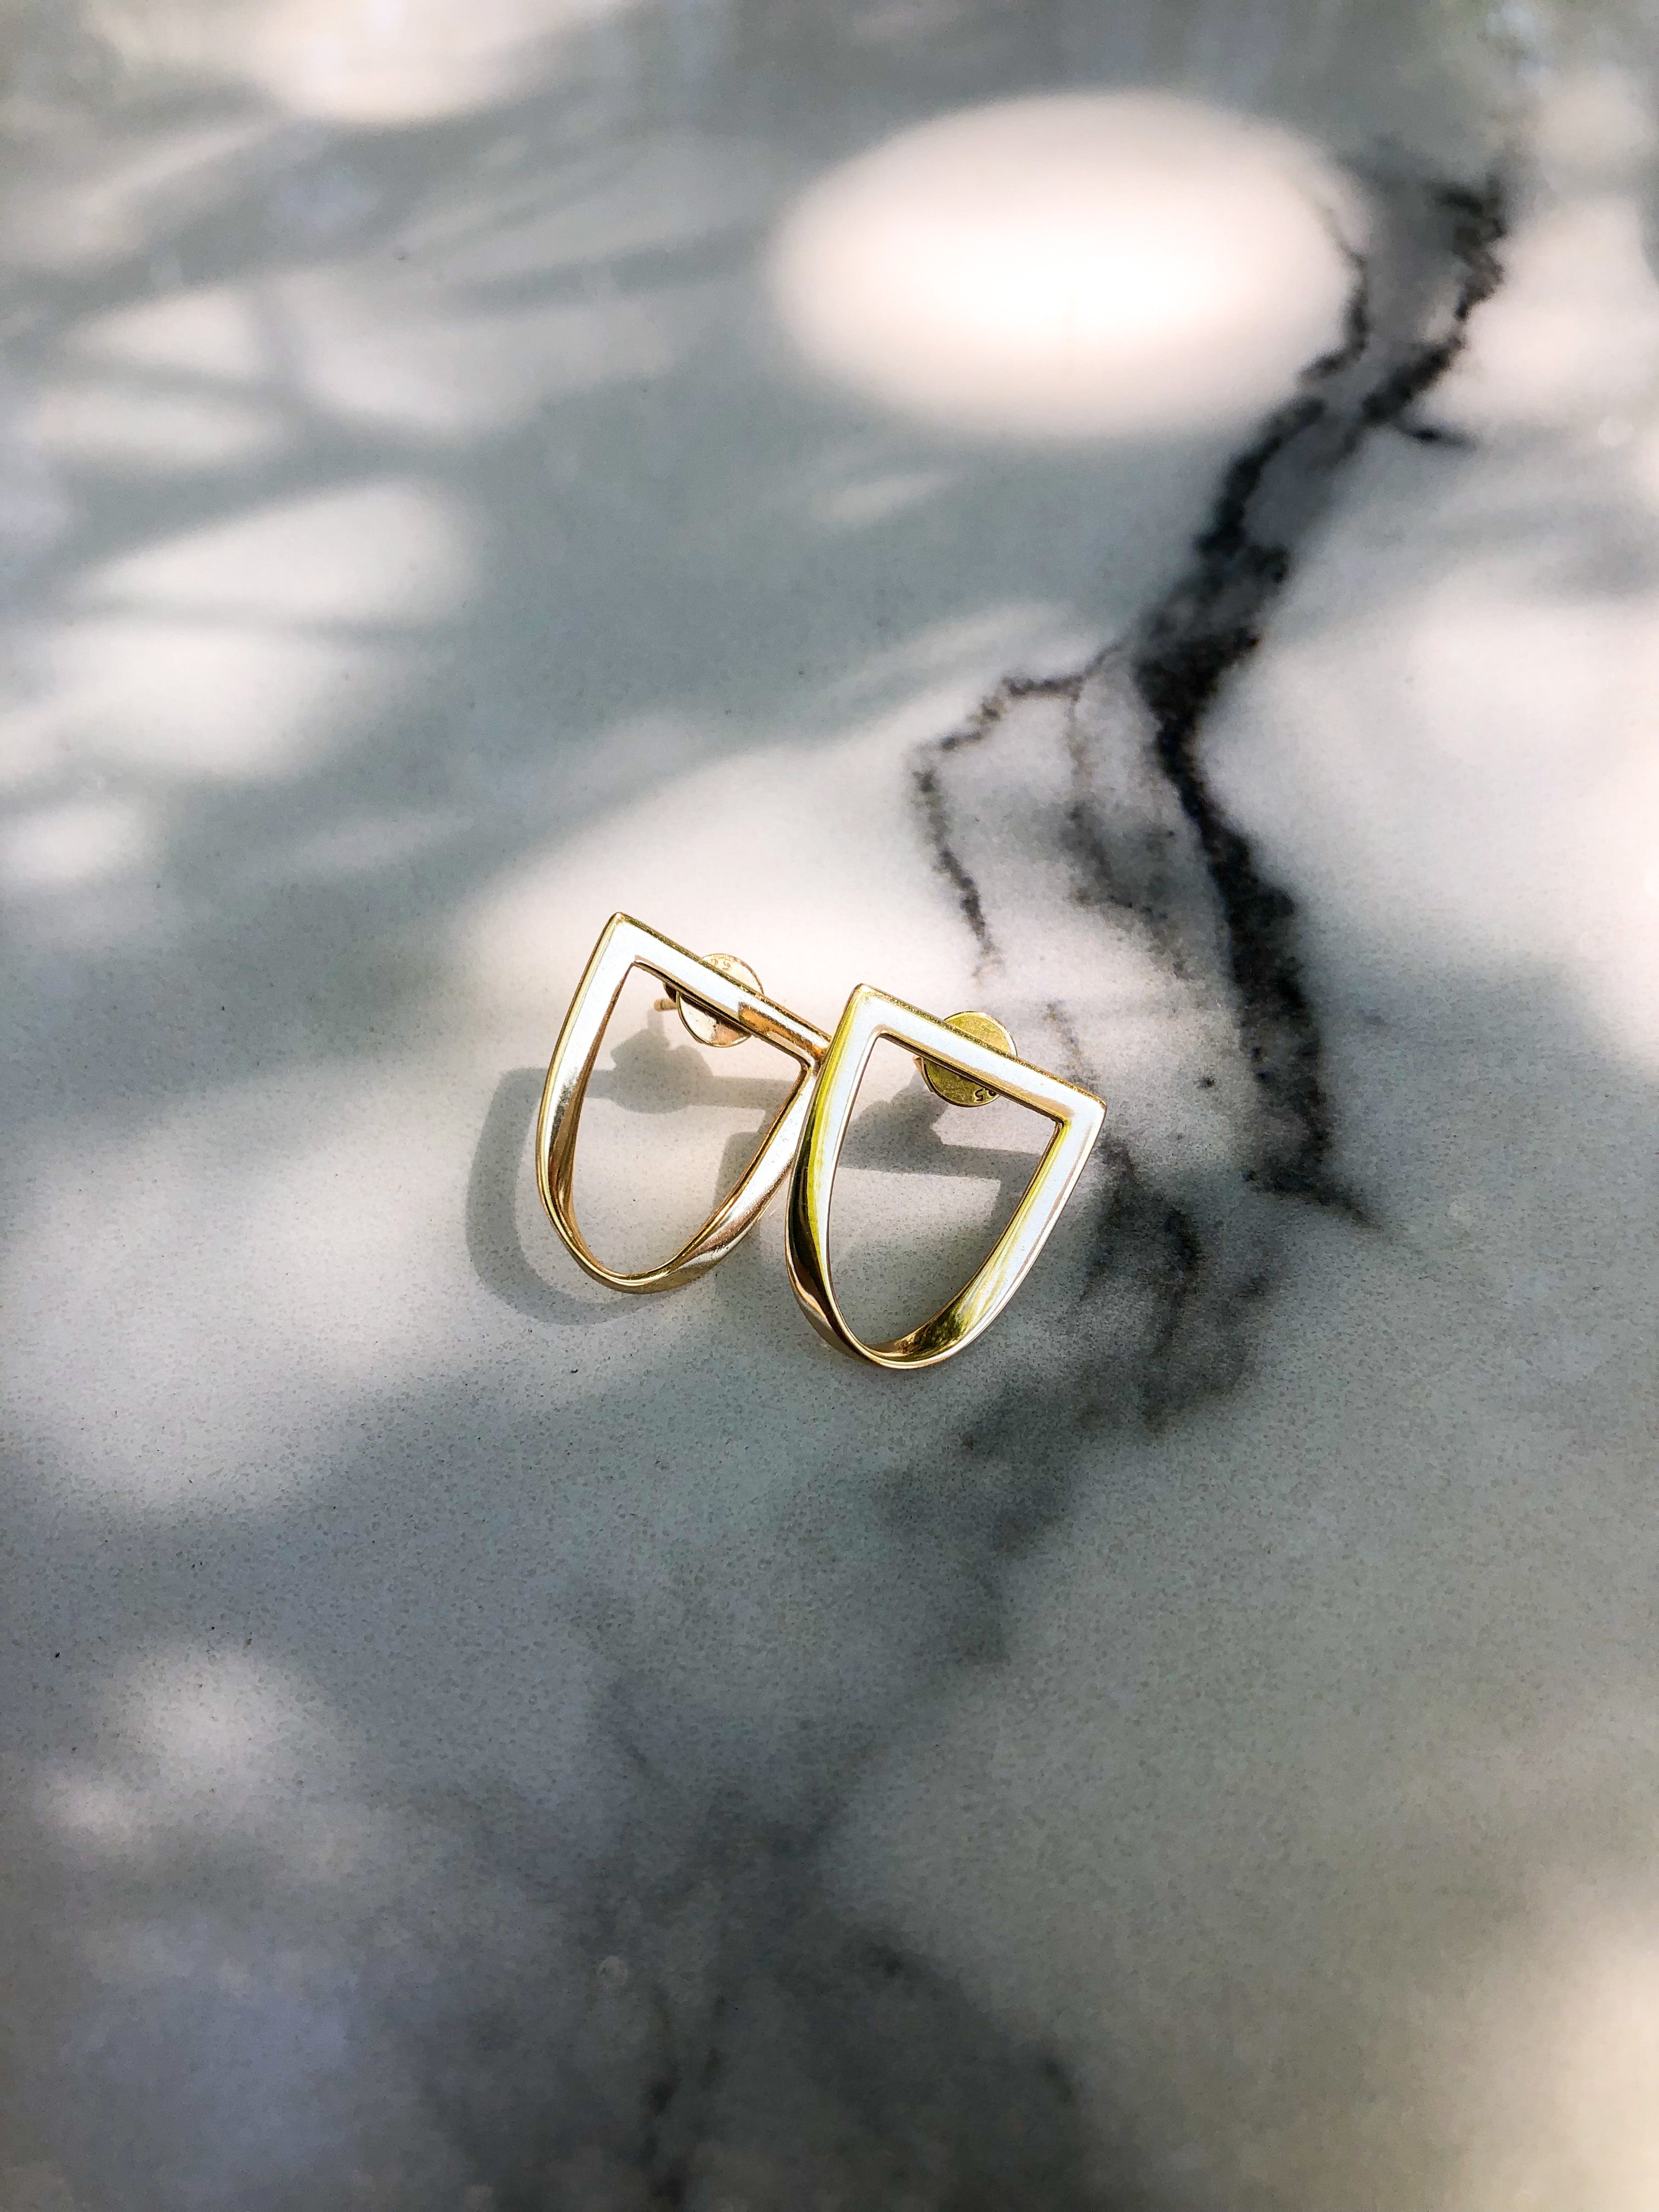 a pair of twist earrings in yellow gold sit atop a marble table top with speckled shadows across it.